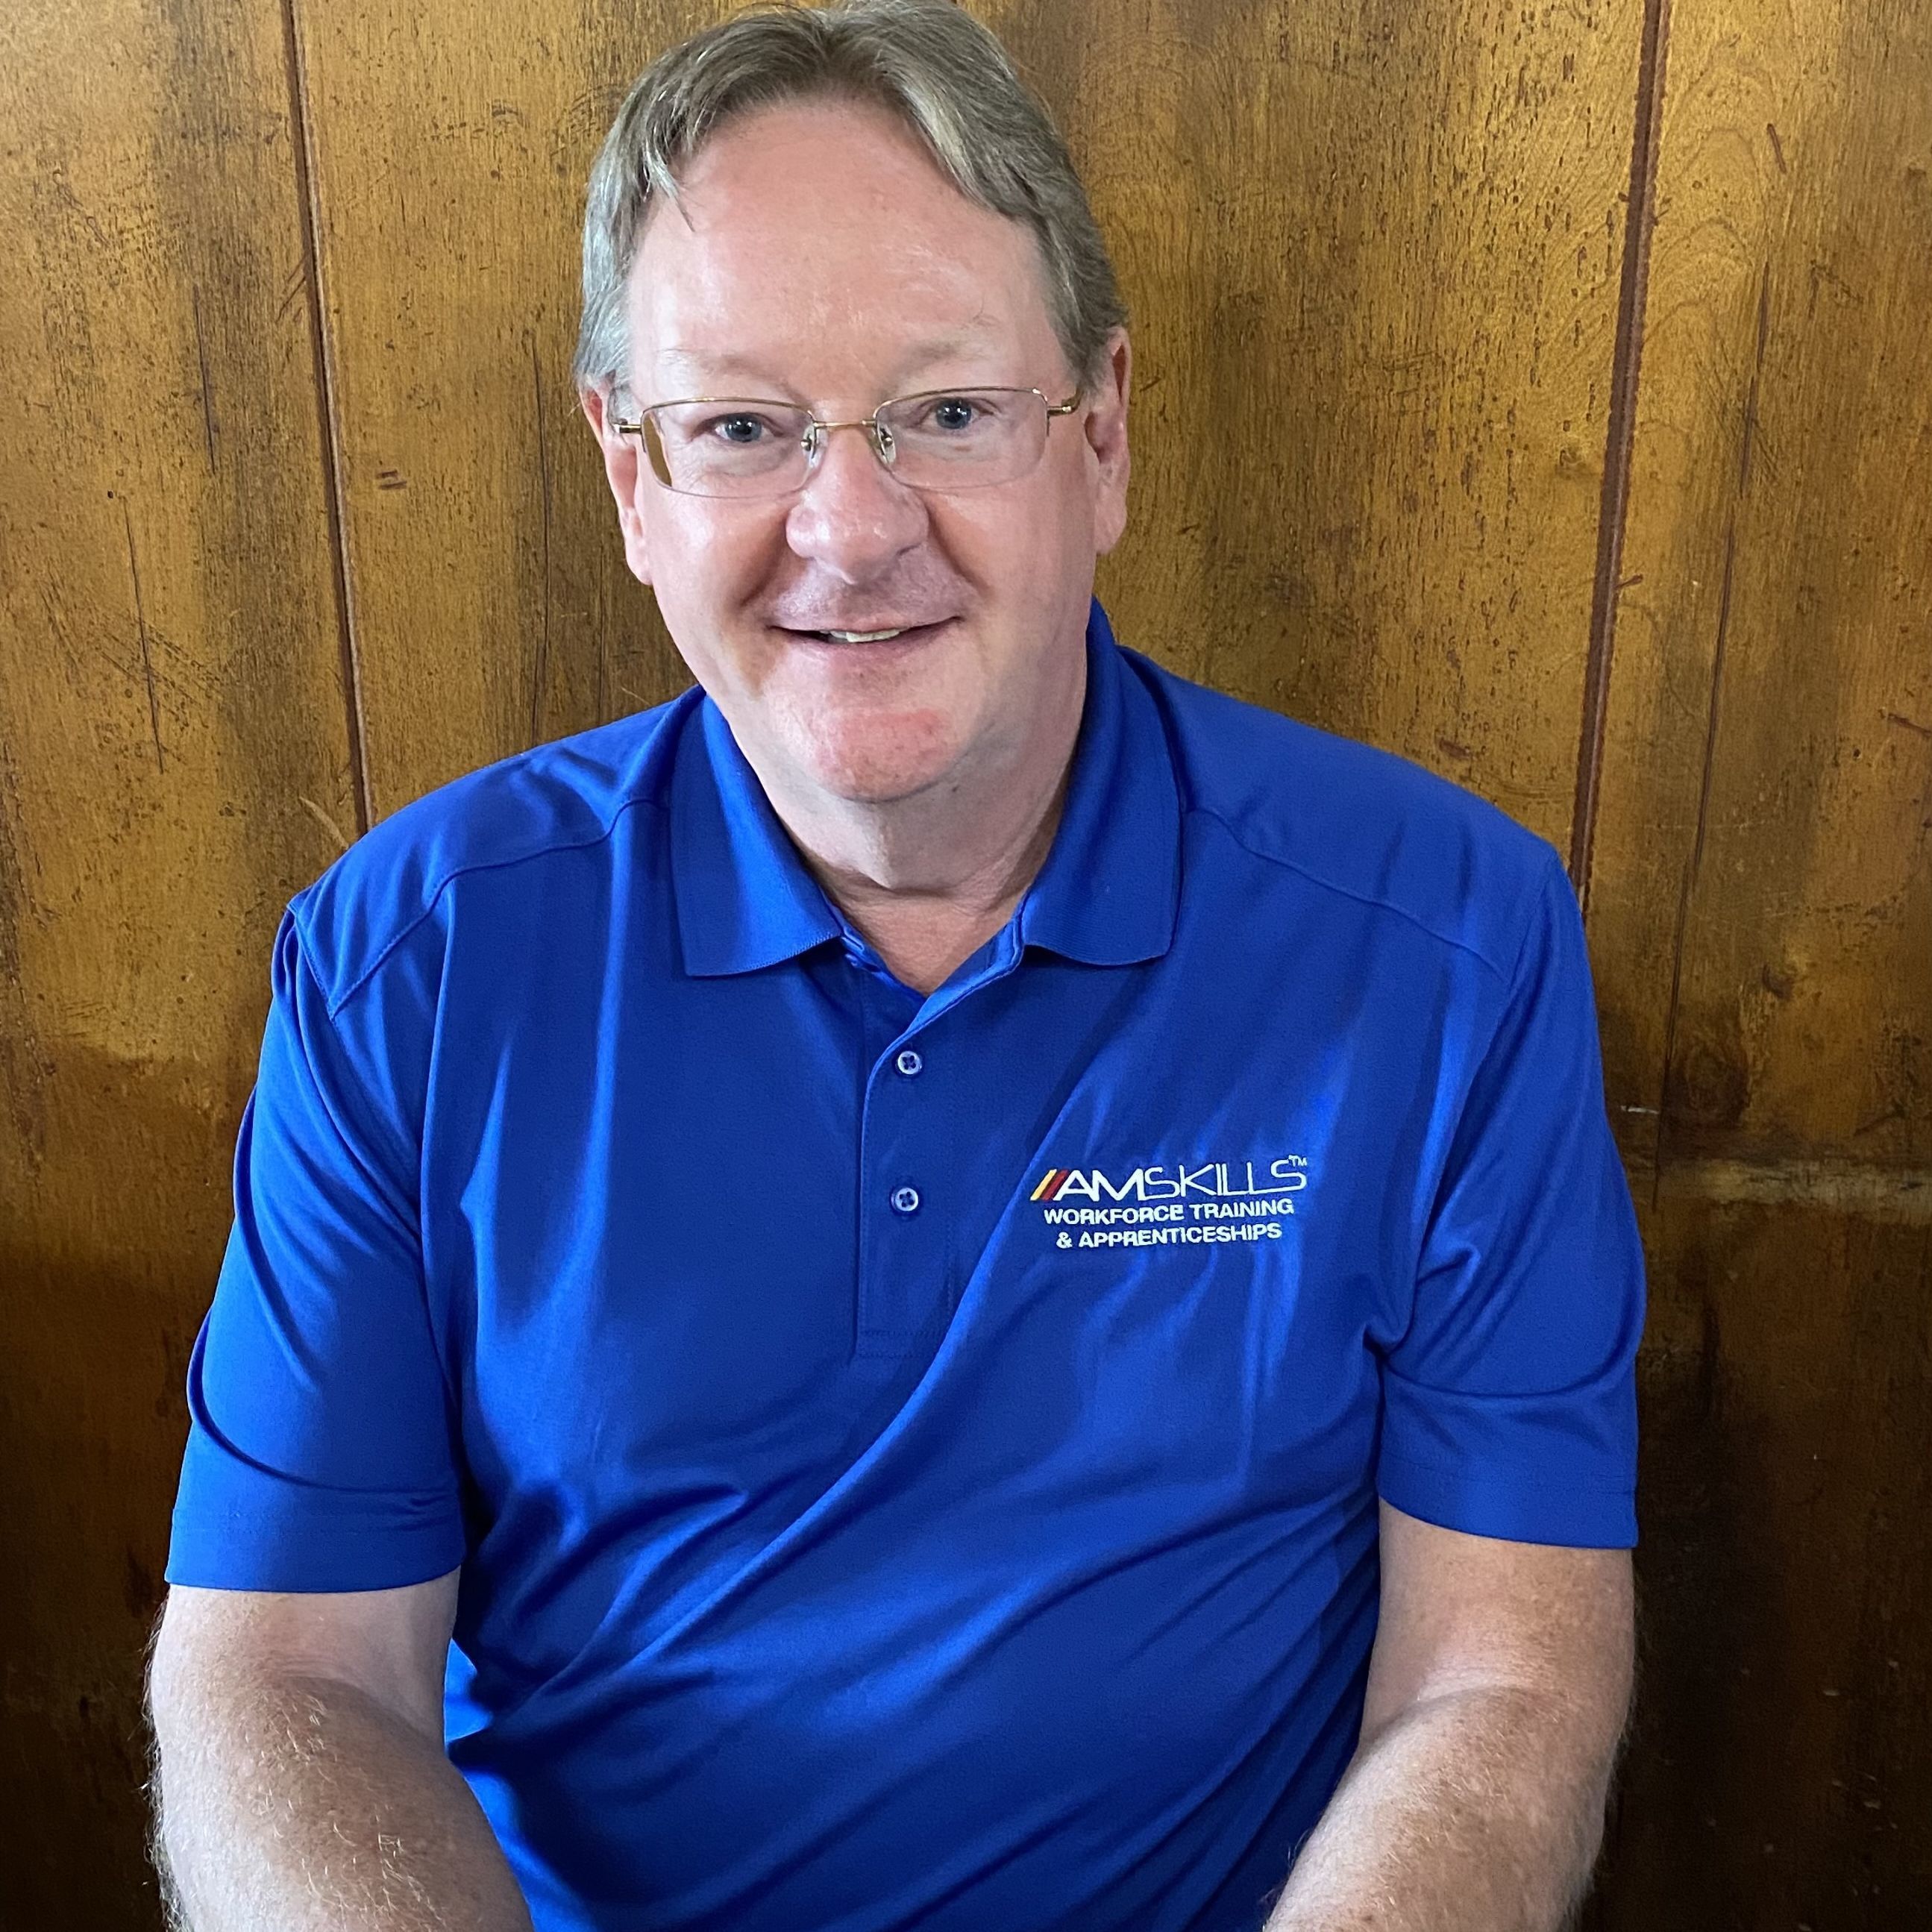 Paying it forward, 42 years later. Meet Jeff Cole, AmSkills’ Mechatronics Master Instructor